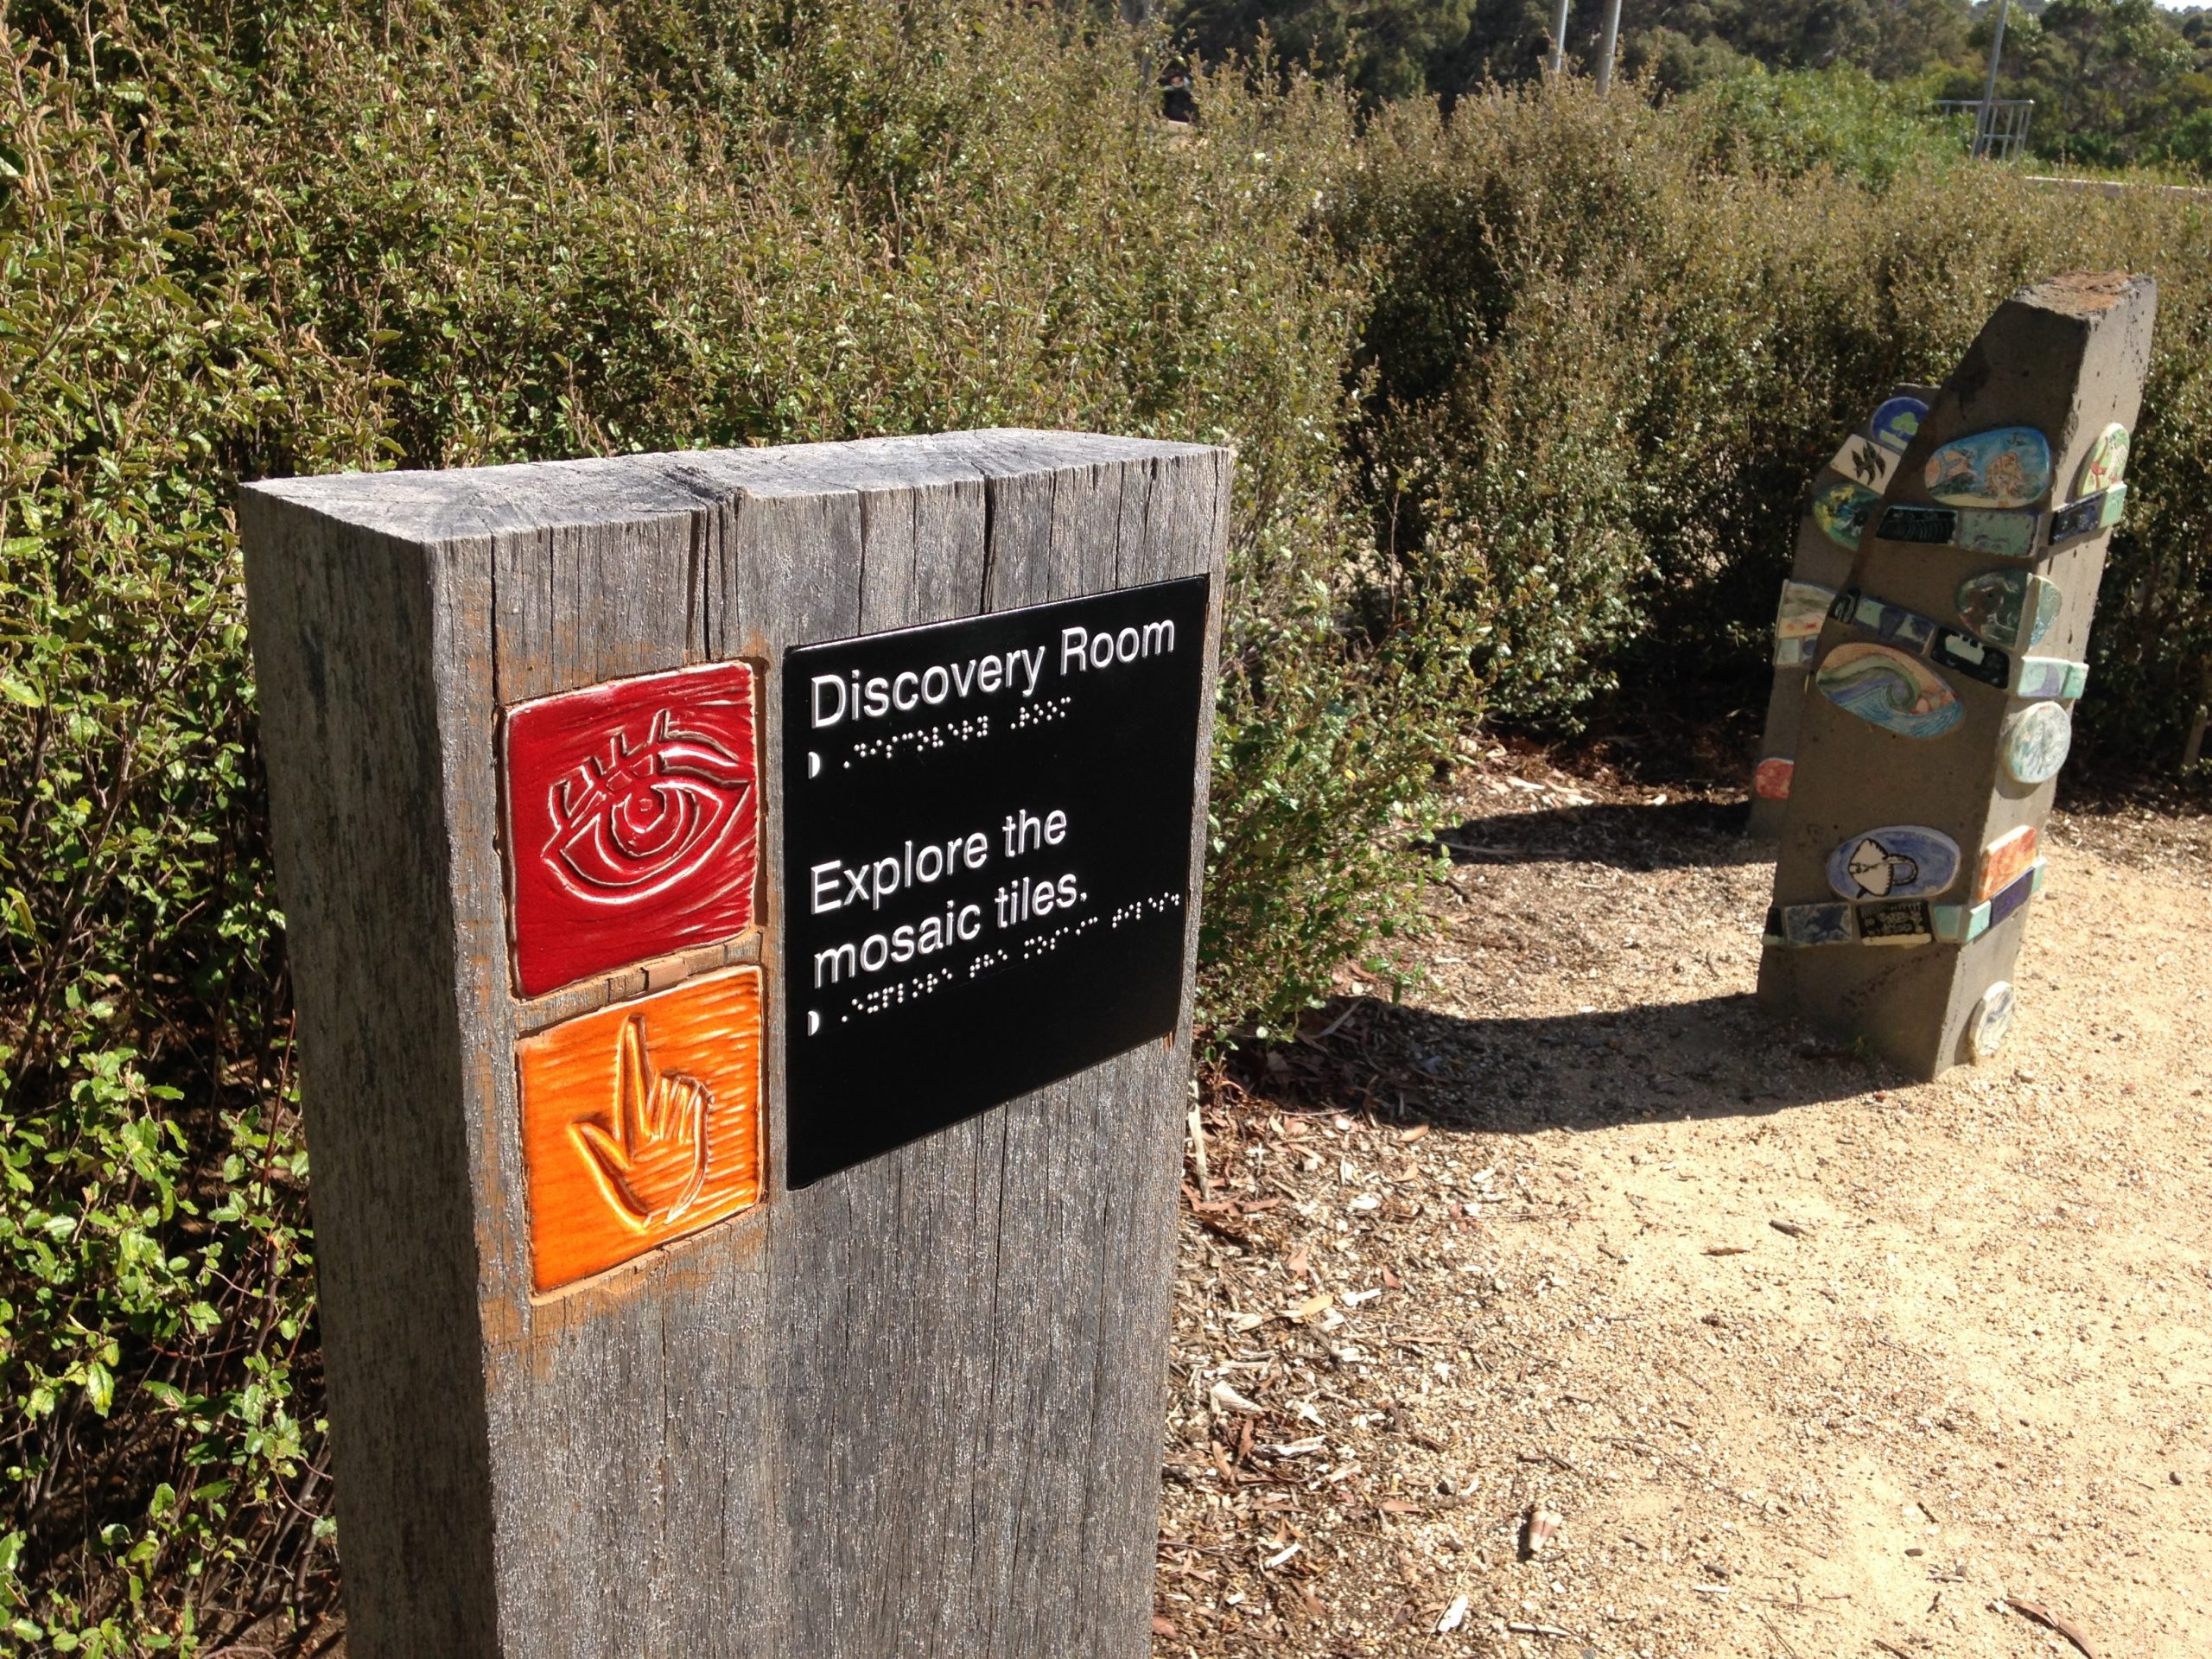 Braille Tactile Sign installed at Bob Pettit sensory Garden in Jan Juc, Victoria.